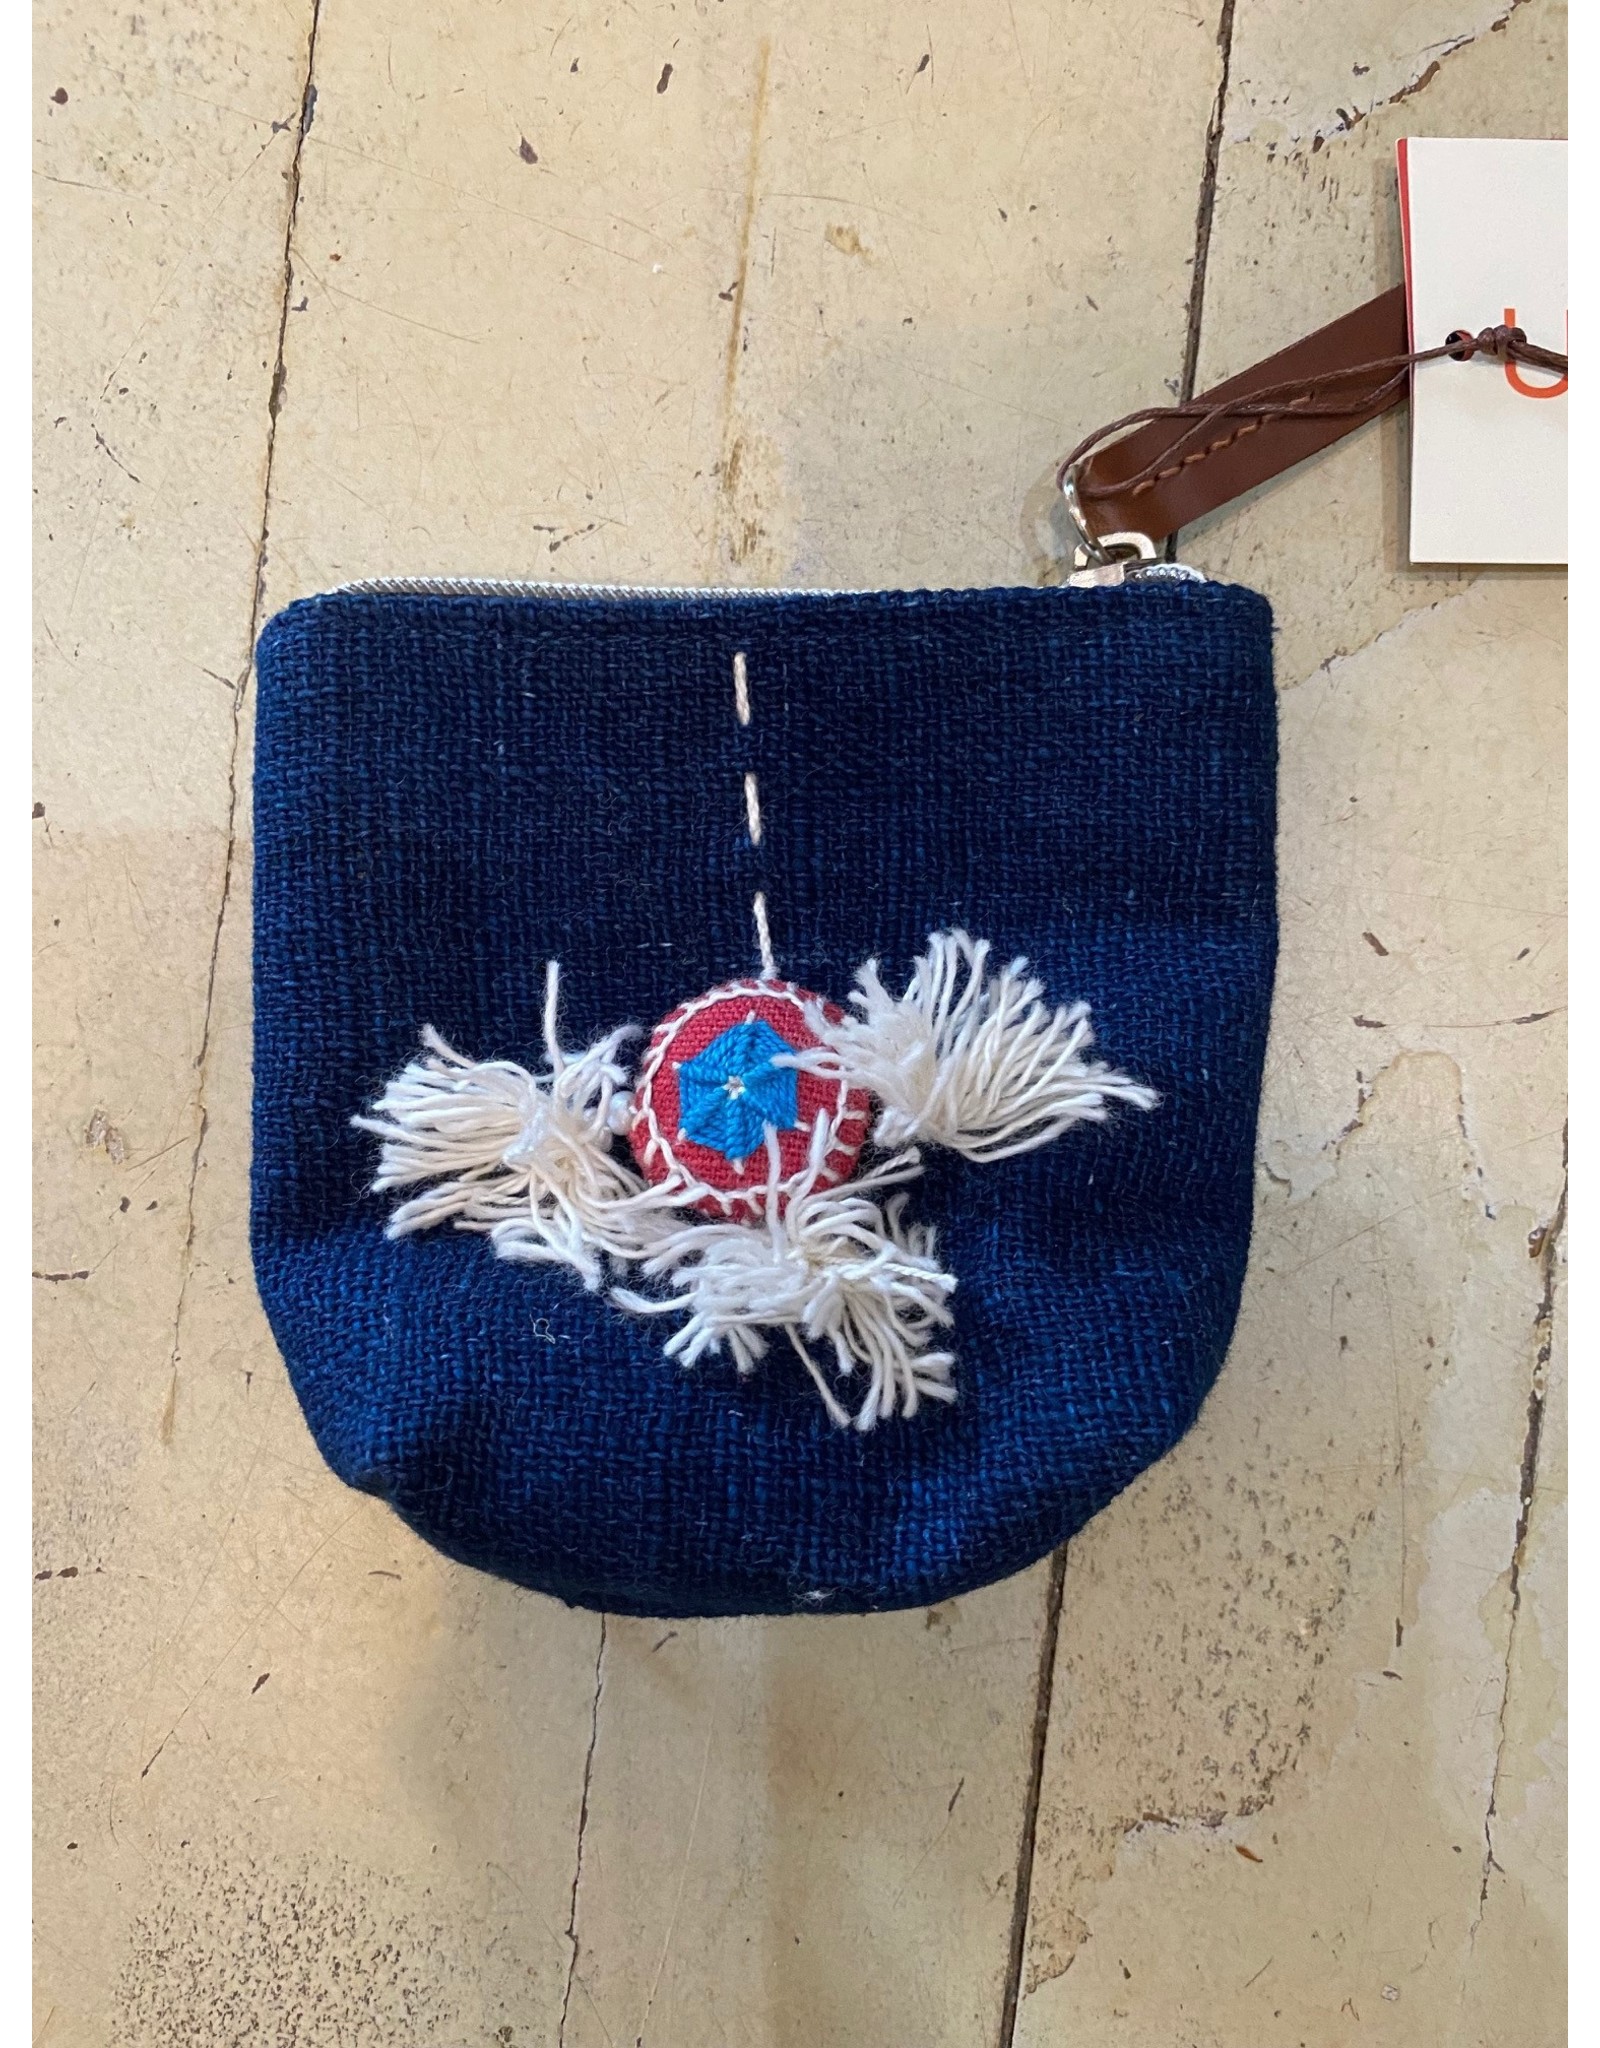 Trade roots Zippered Pouch w/Embroidery and Tassels, Indigo Cotton body